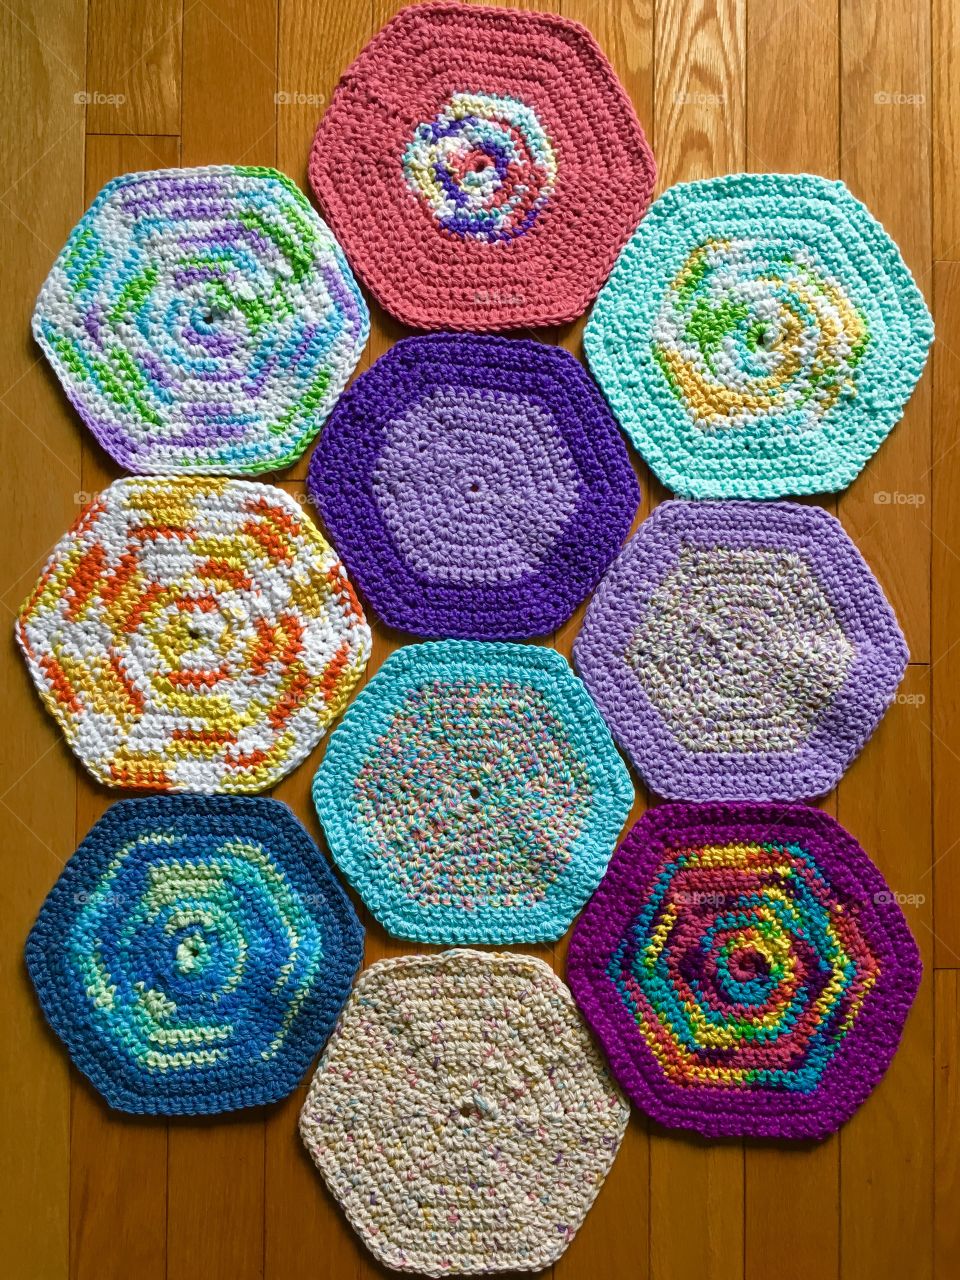 Dishcloths my mother made